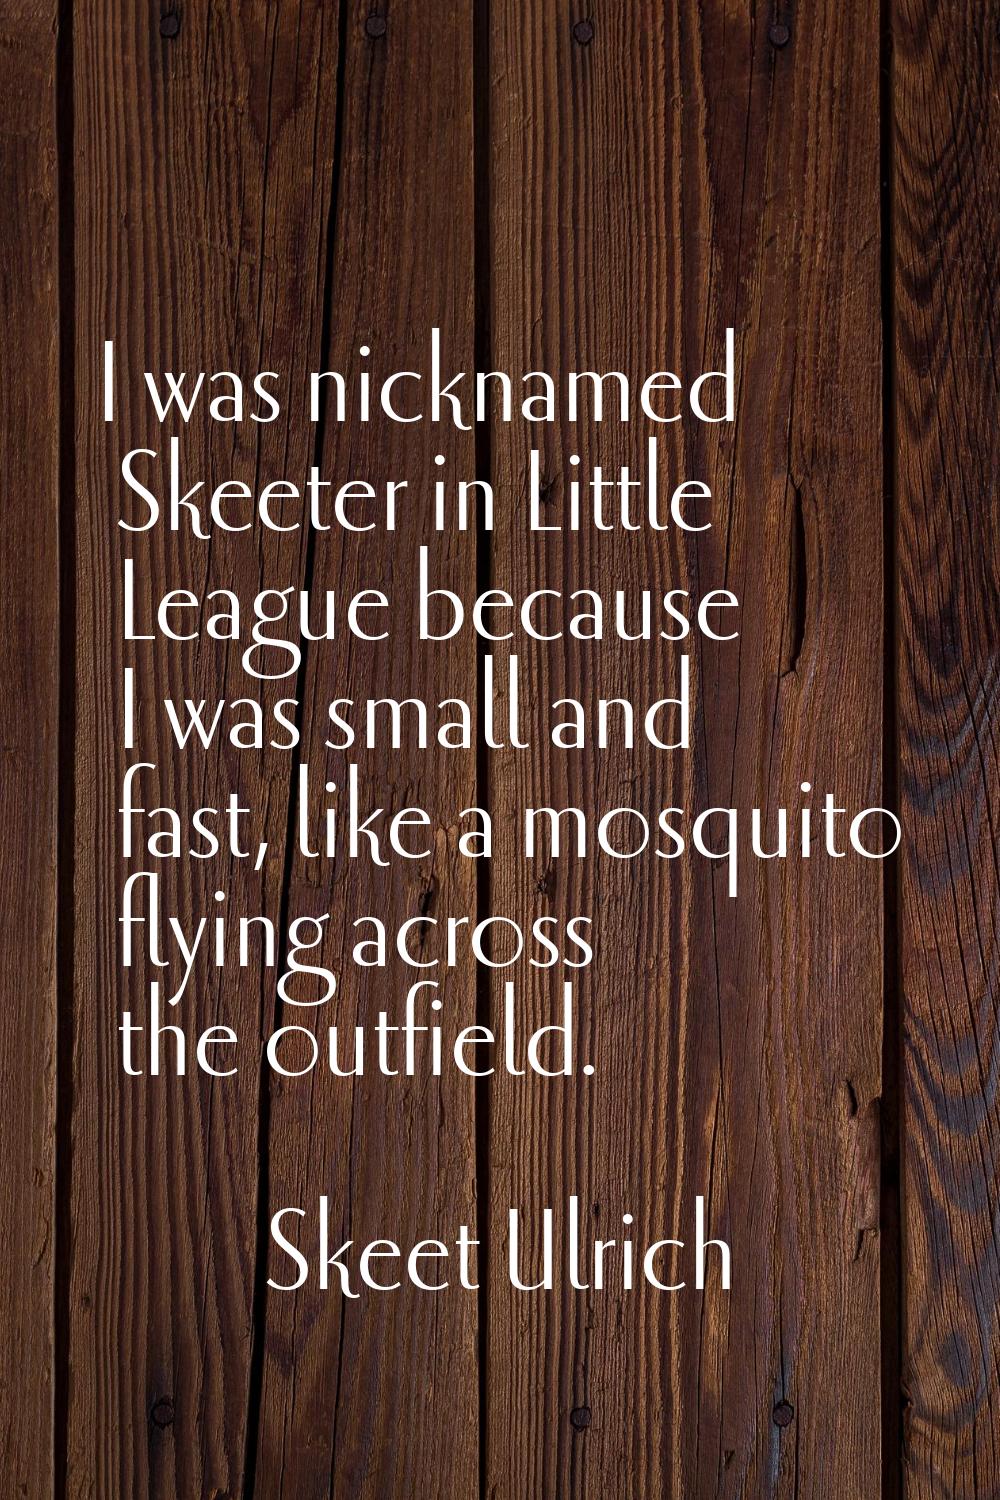 I was nicknamed Skeeter in Little League because I was small and fast, like a mosquito flying acros